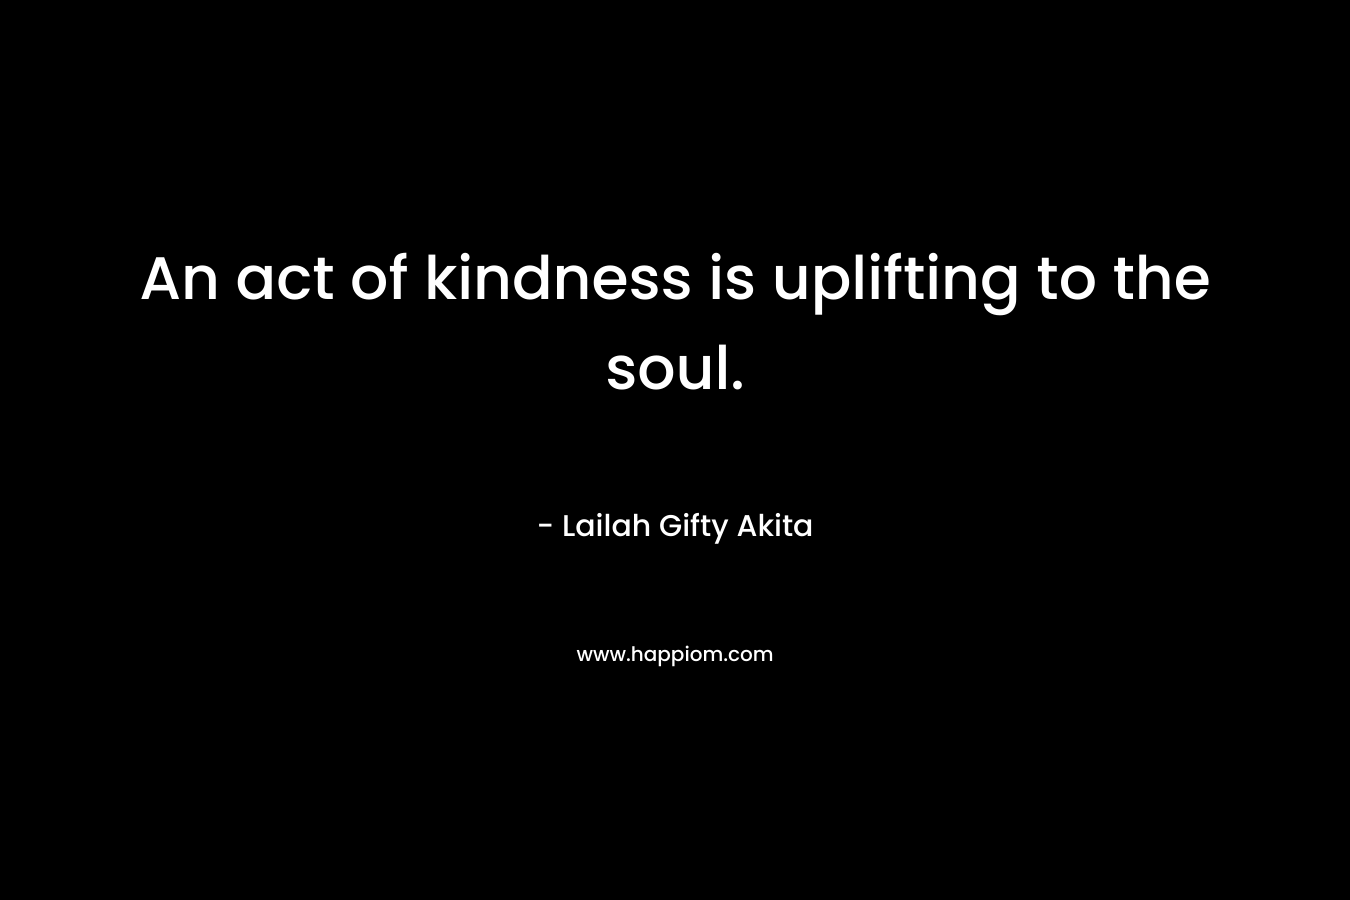 An act of kindness is uplifting to the soul.